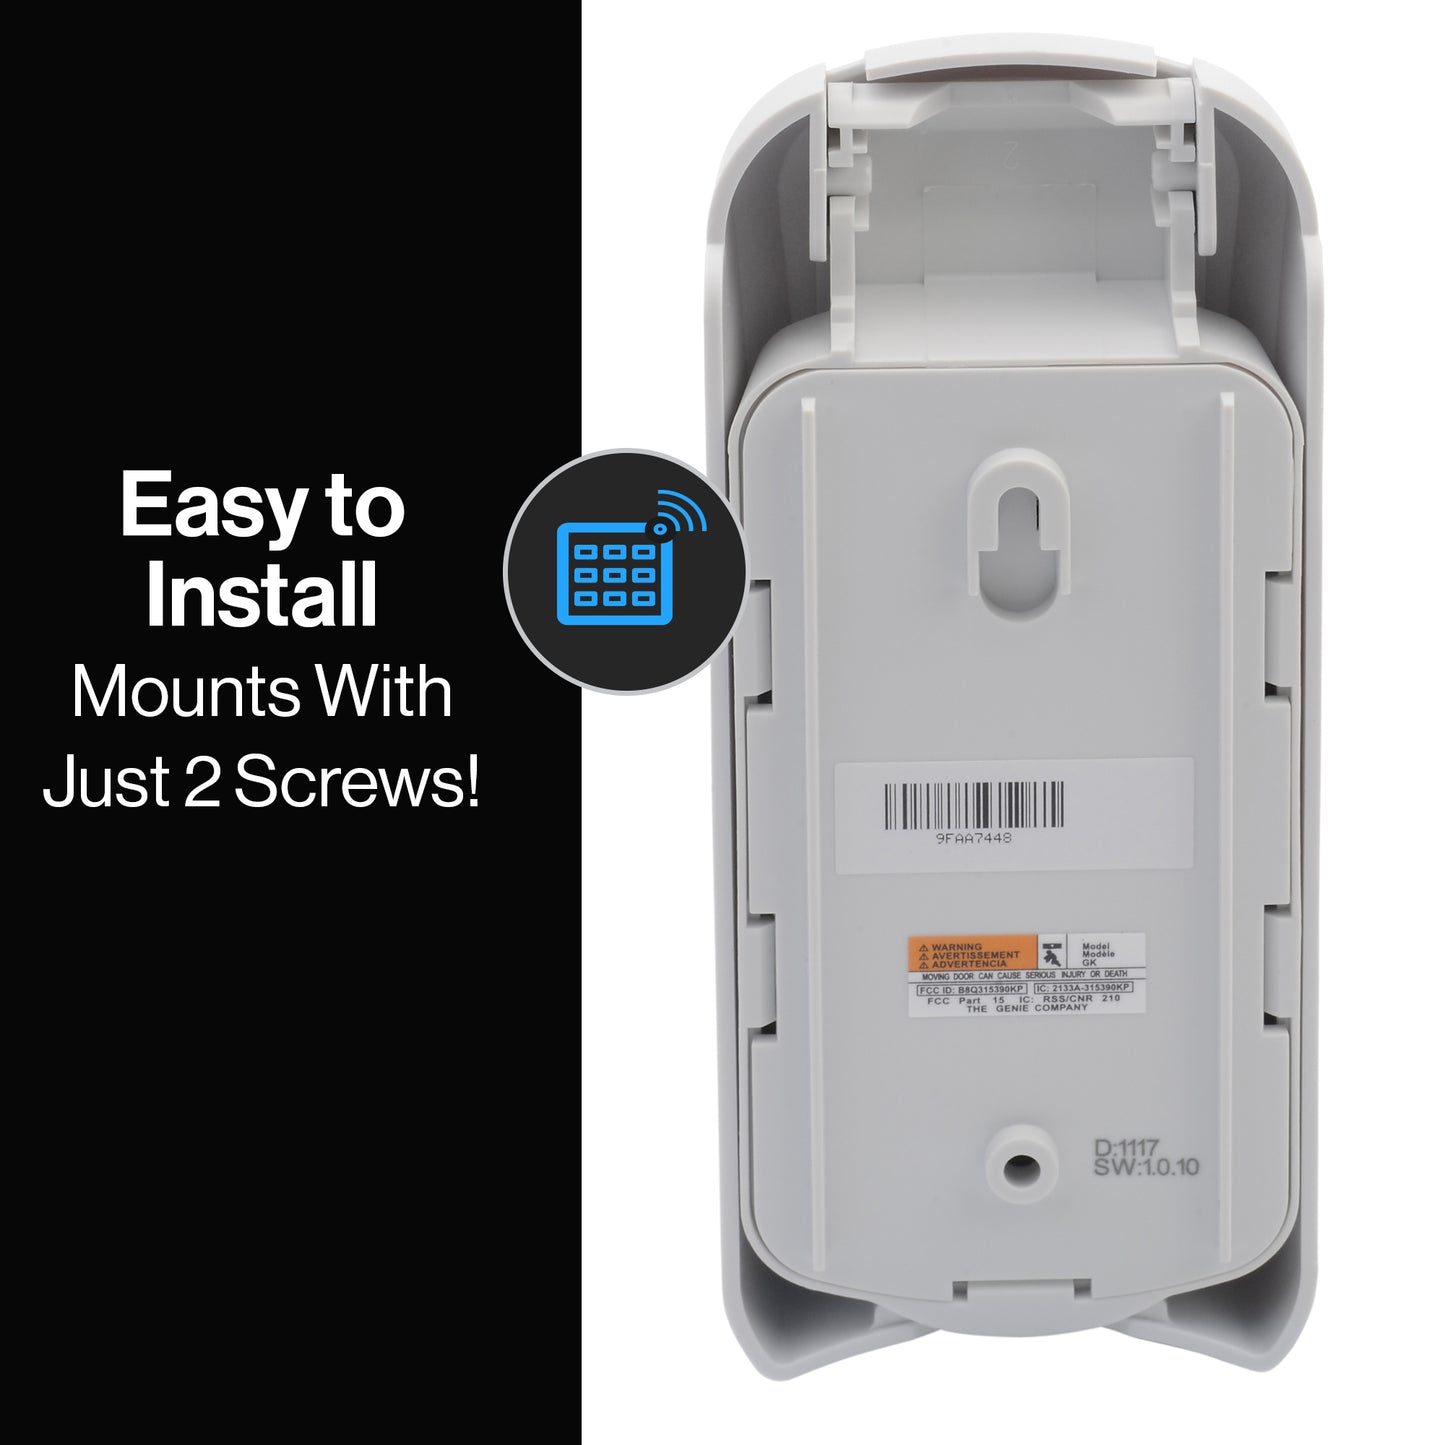 With just two mounting screws the Genie wireless keypad is easy to install